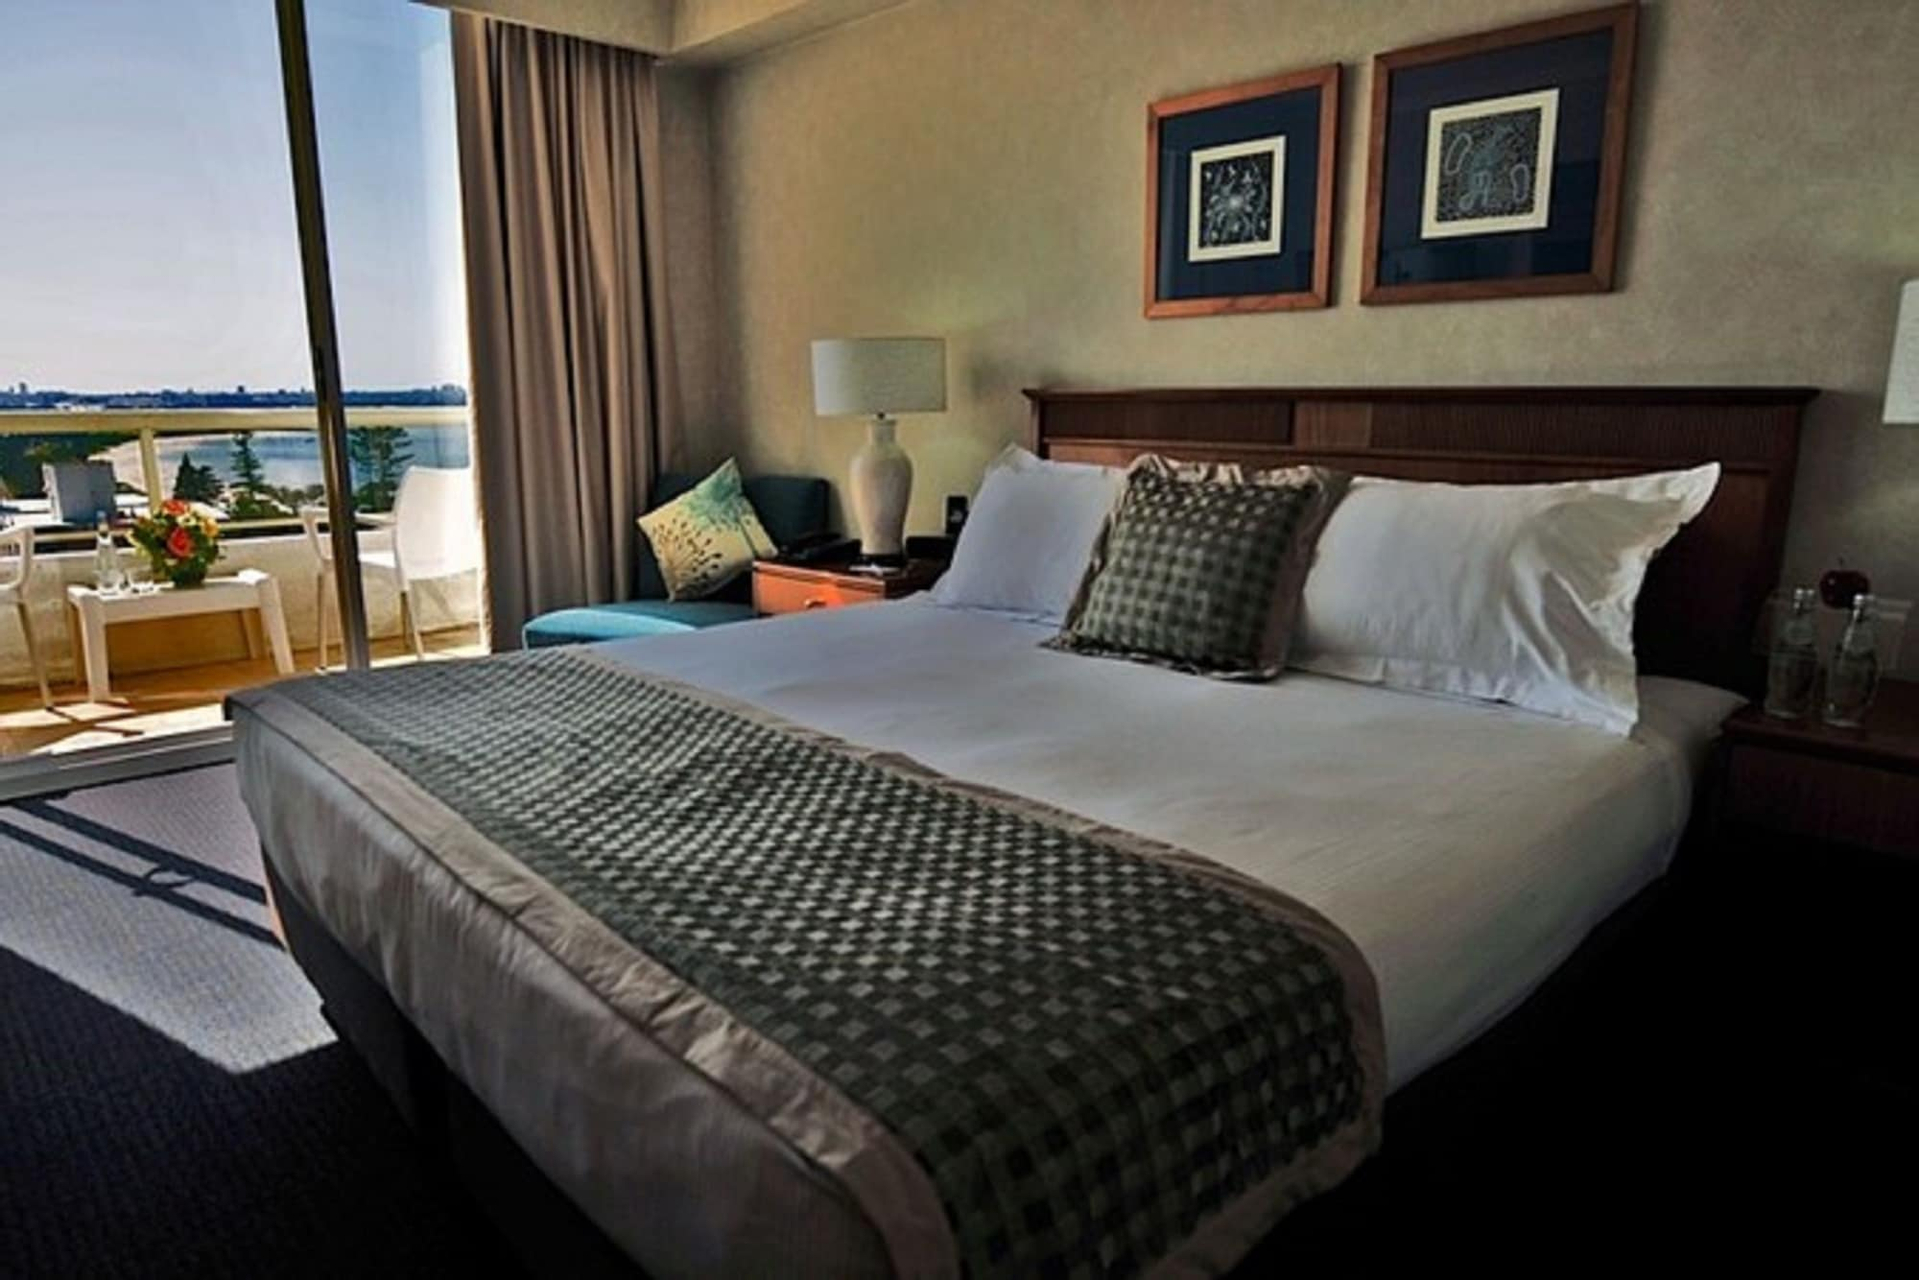 King Superior Room - Ocean View